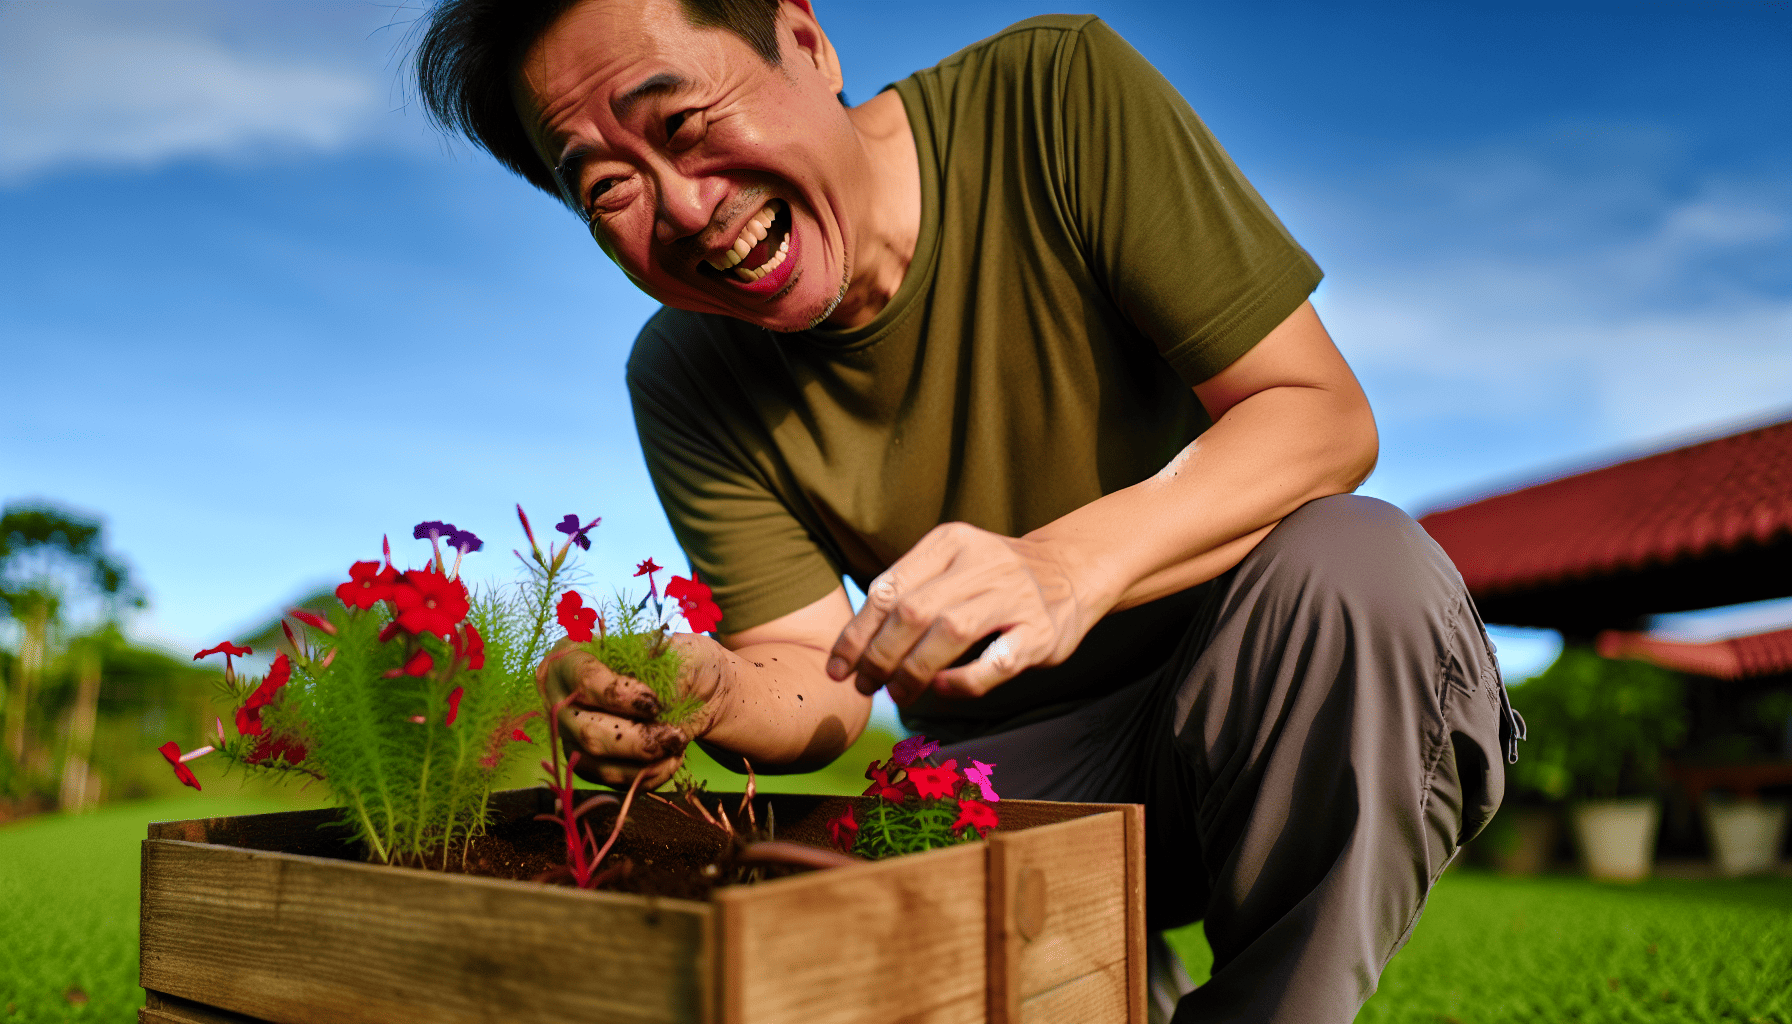 Container gardening for beginners: A person planting flowers in a wooden container.